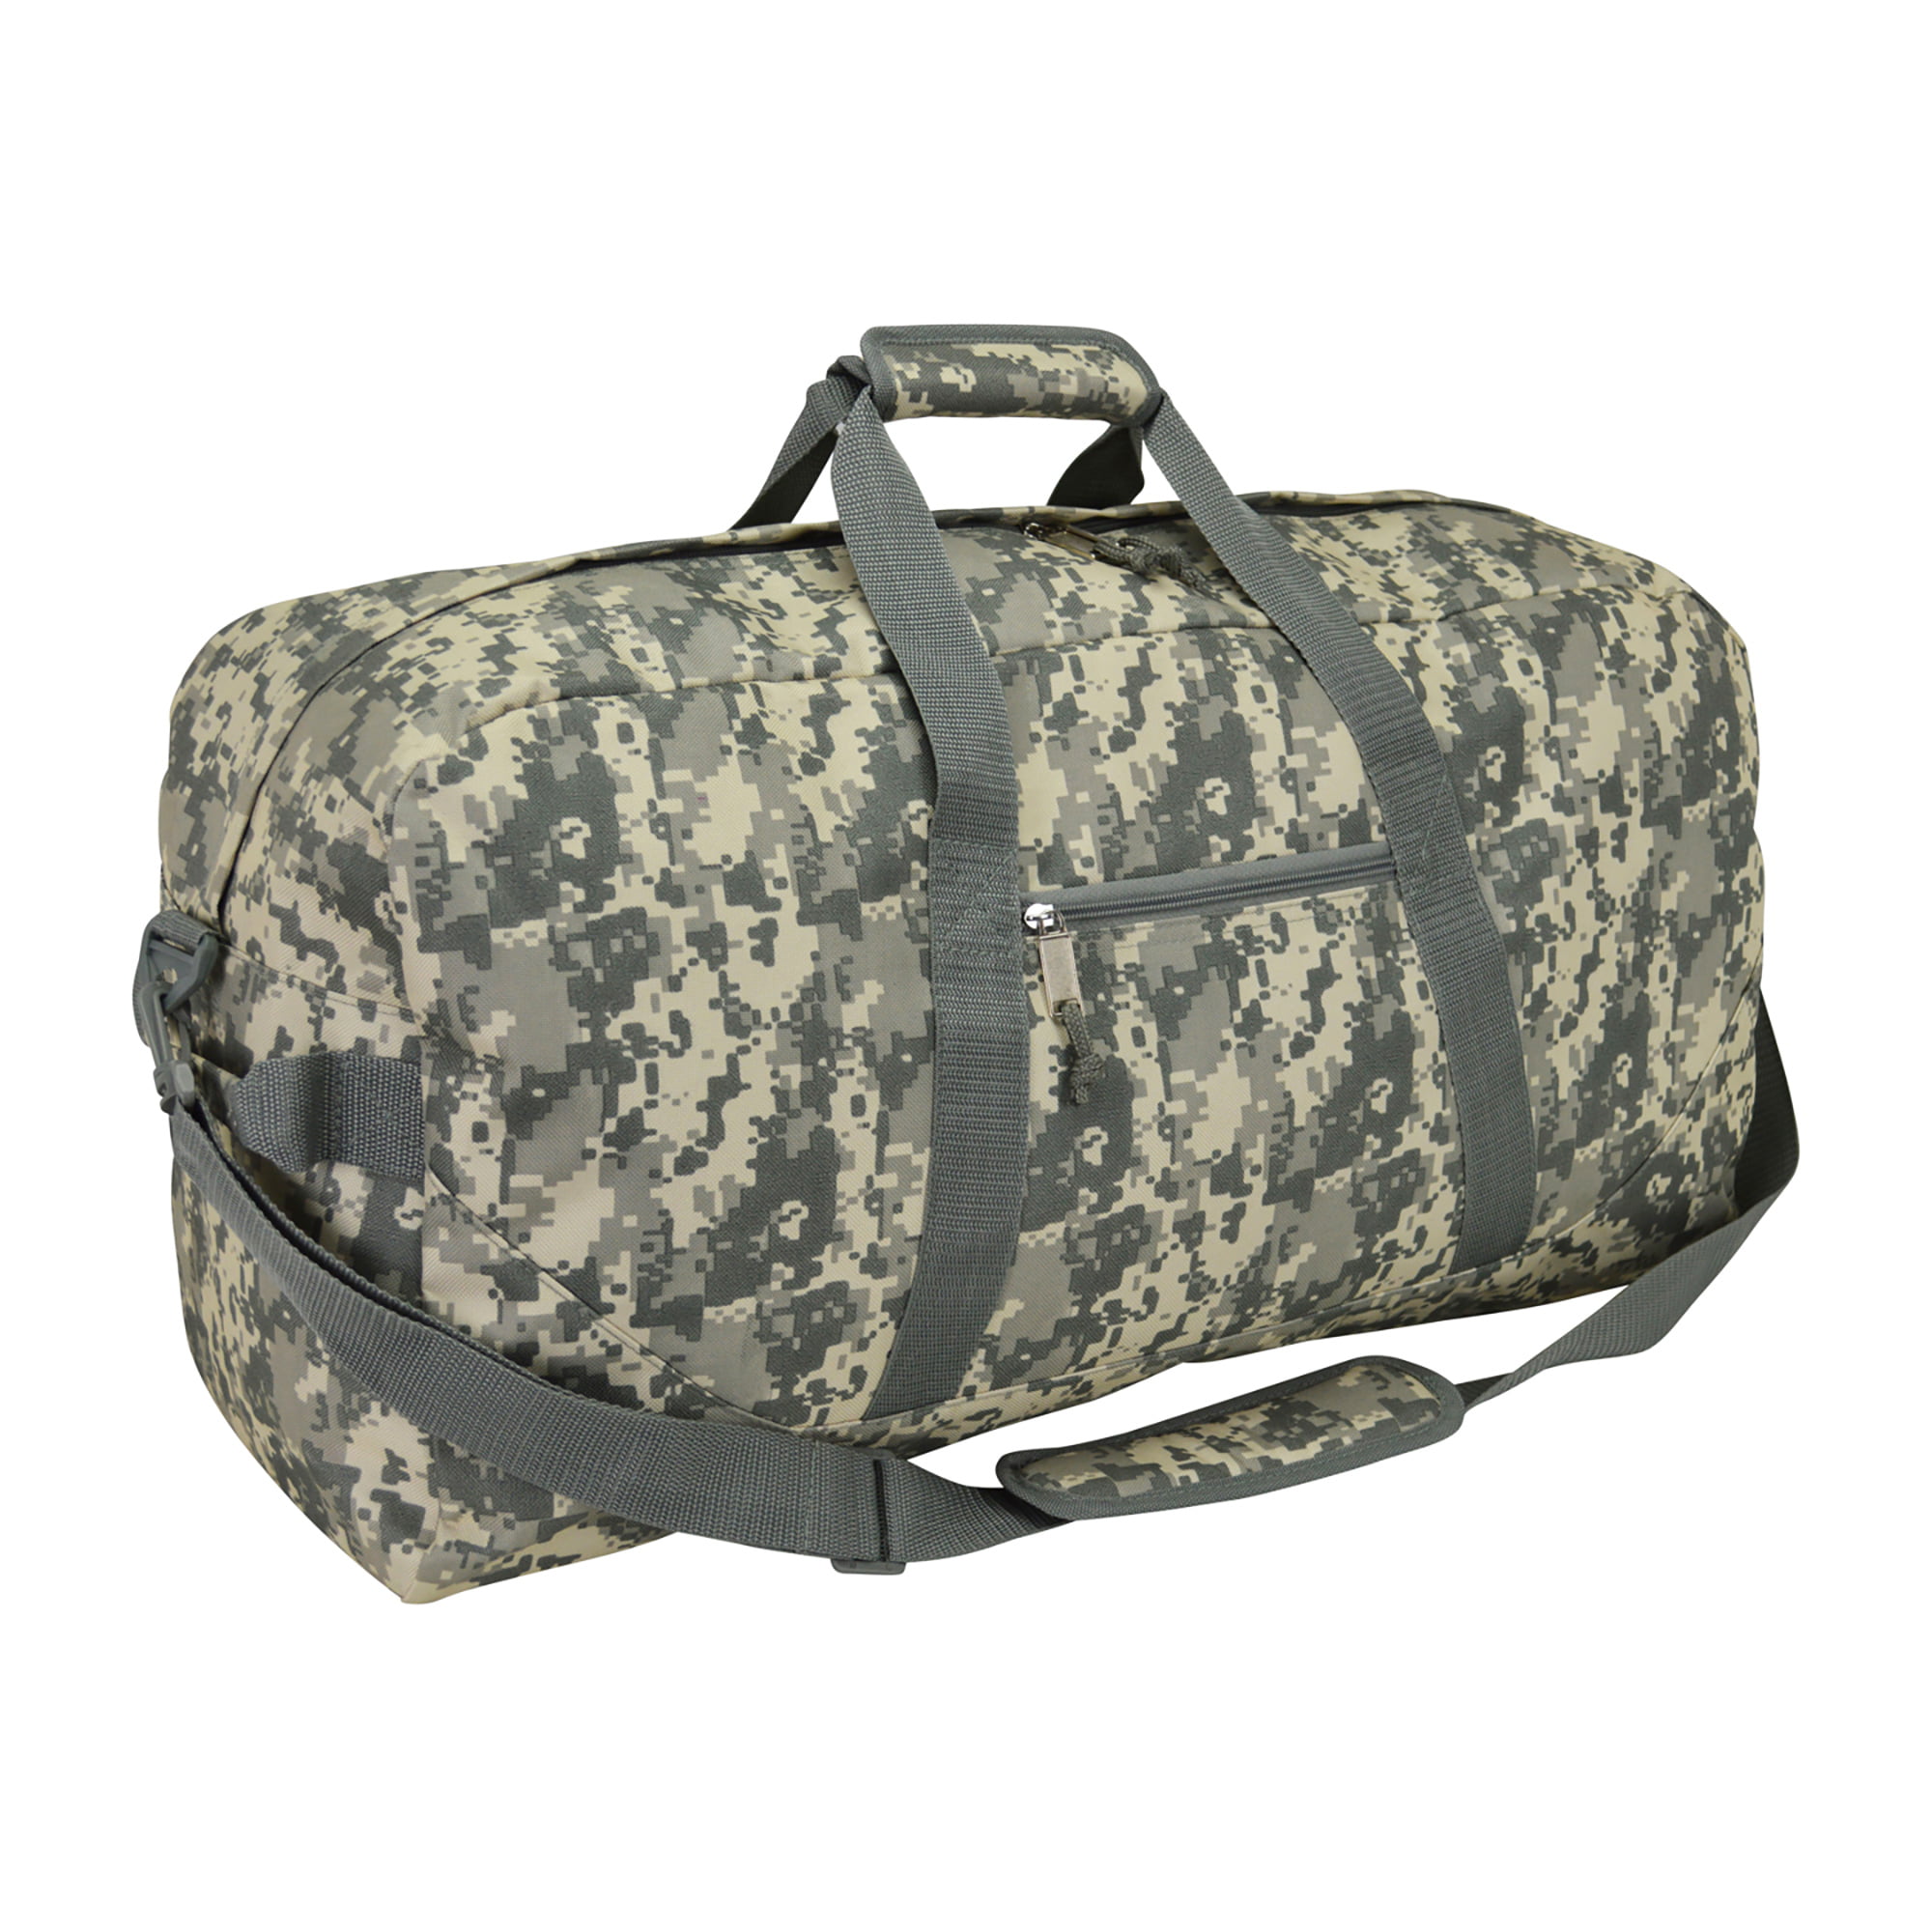 21 Large Duffle Bag with Adjustable Strap in Digital Camouflage - 0 - 0